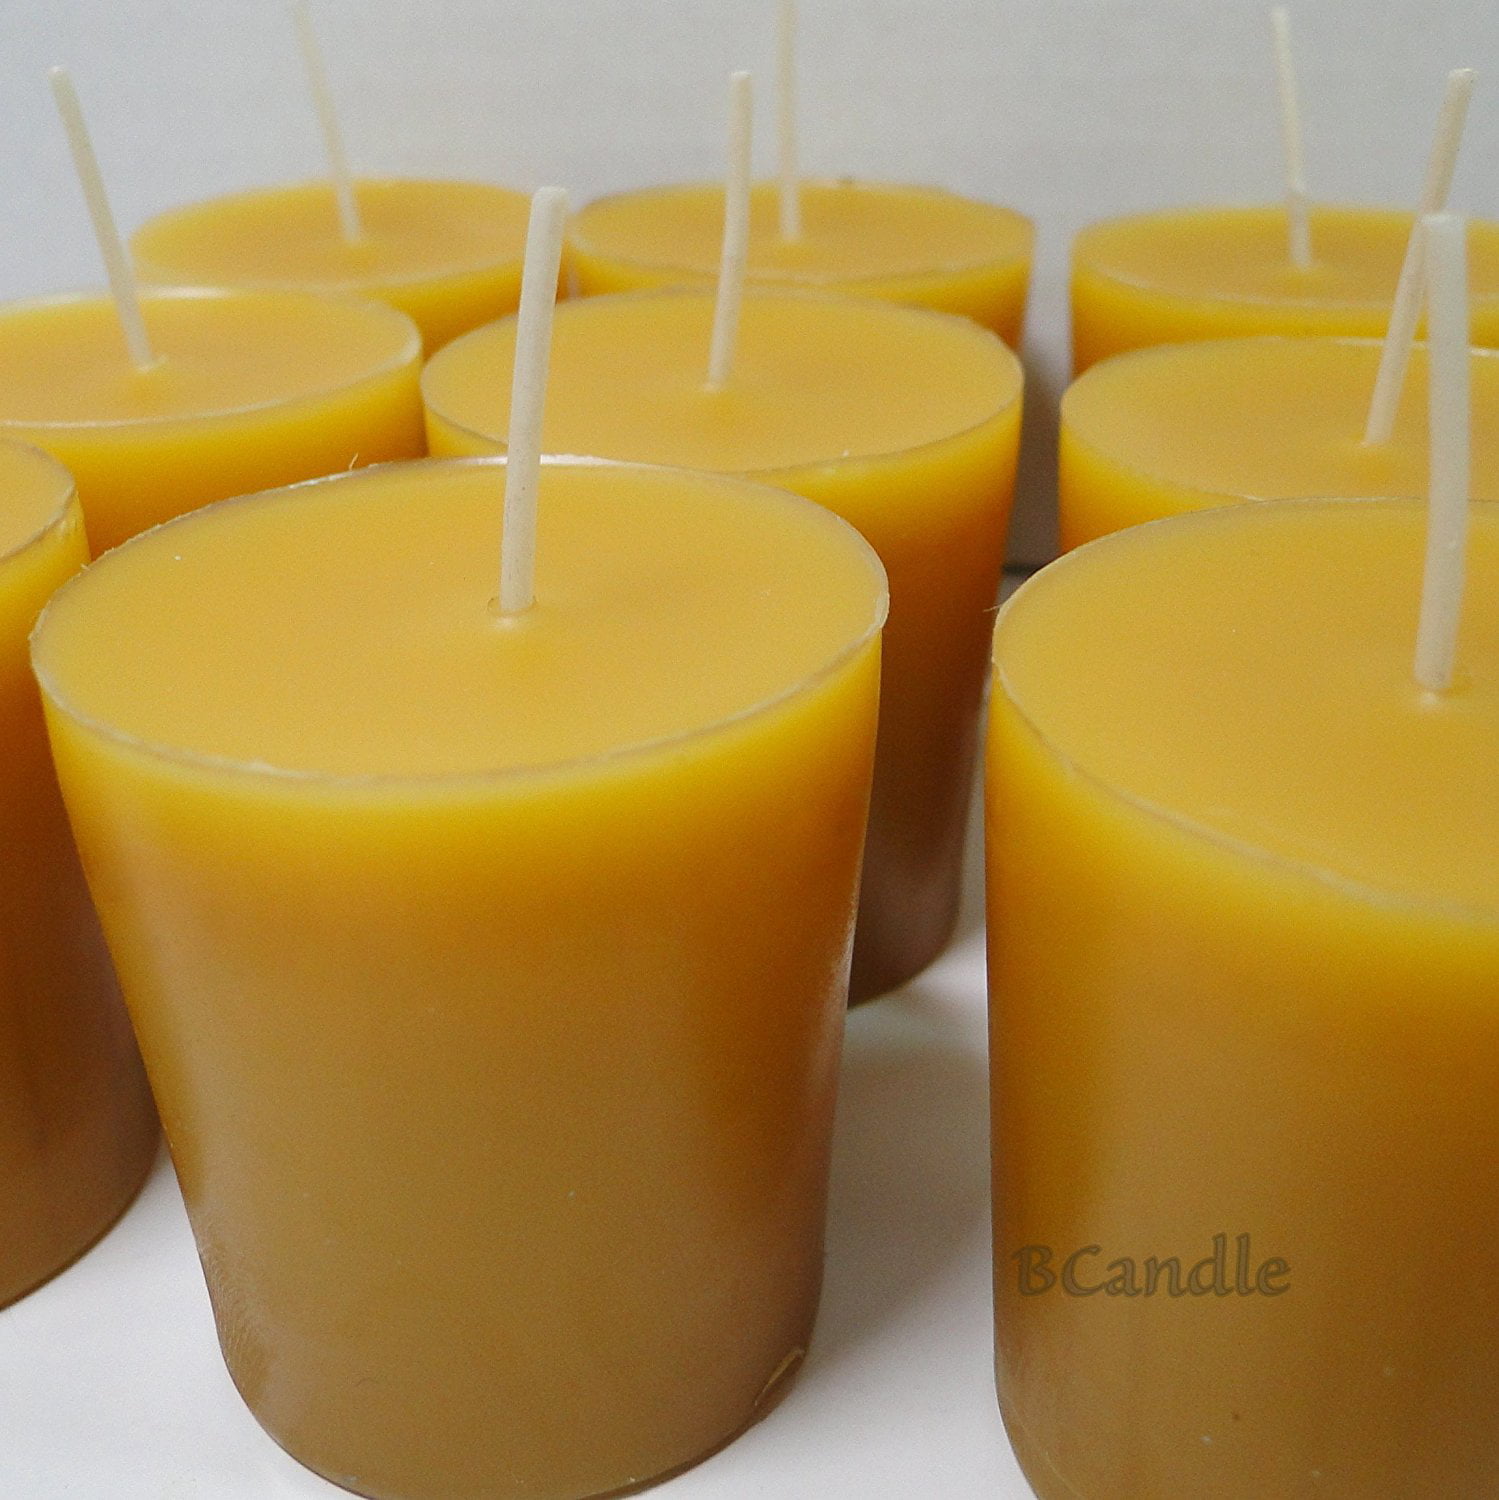 12 Hour Votive Candles 12 Natural Honey Scented 100 Percent  Beeswax Votives 